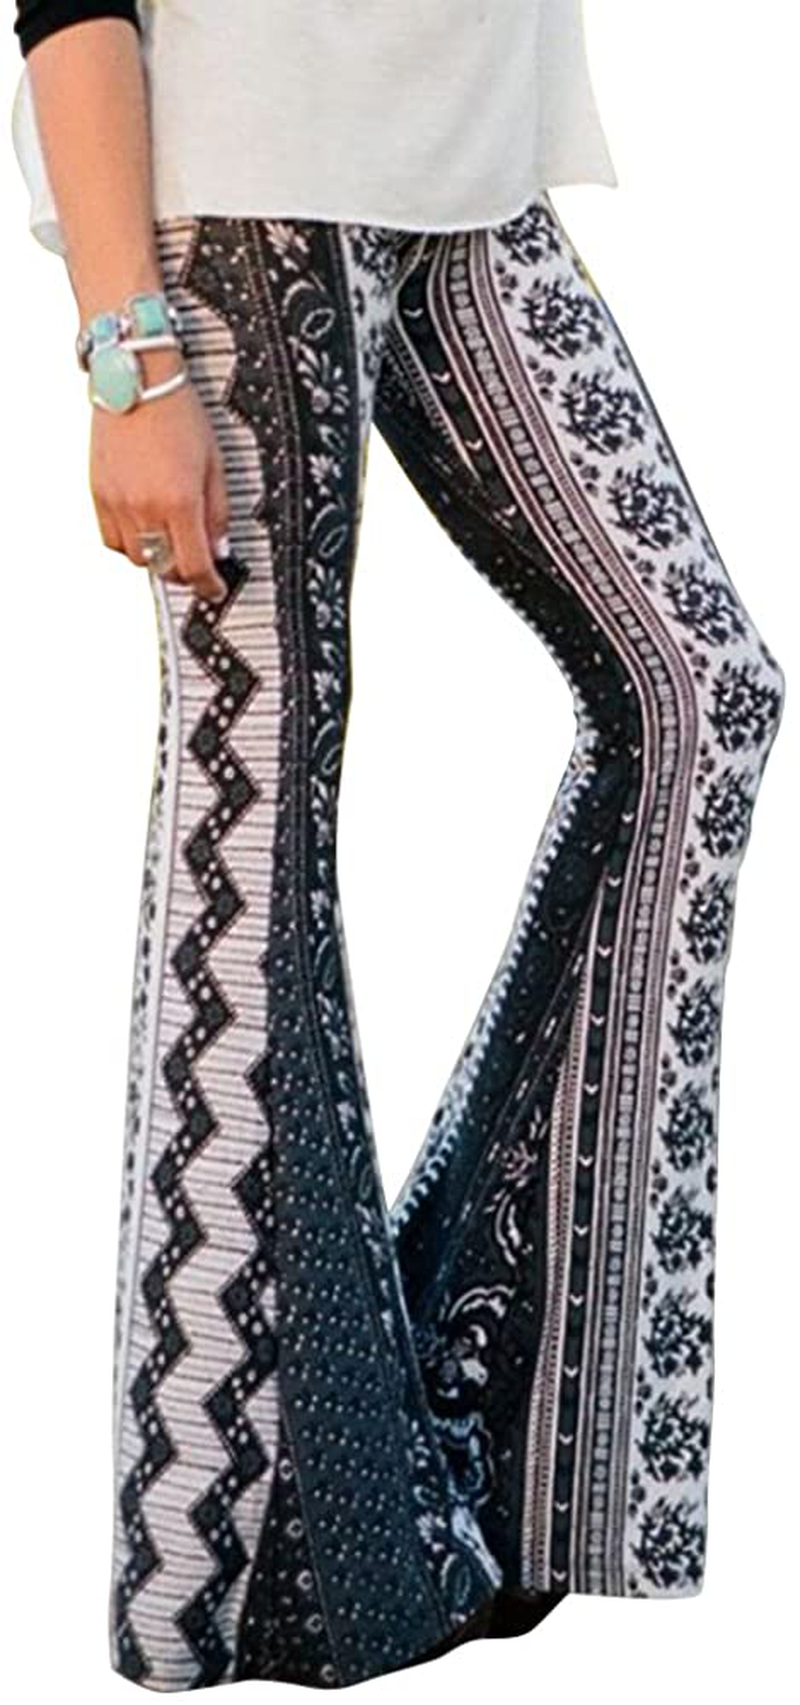 Women High Waist Stretchy Bell Bottom Leggings Retro Floral Flare Palazzo Pant Trousers